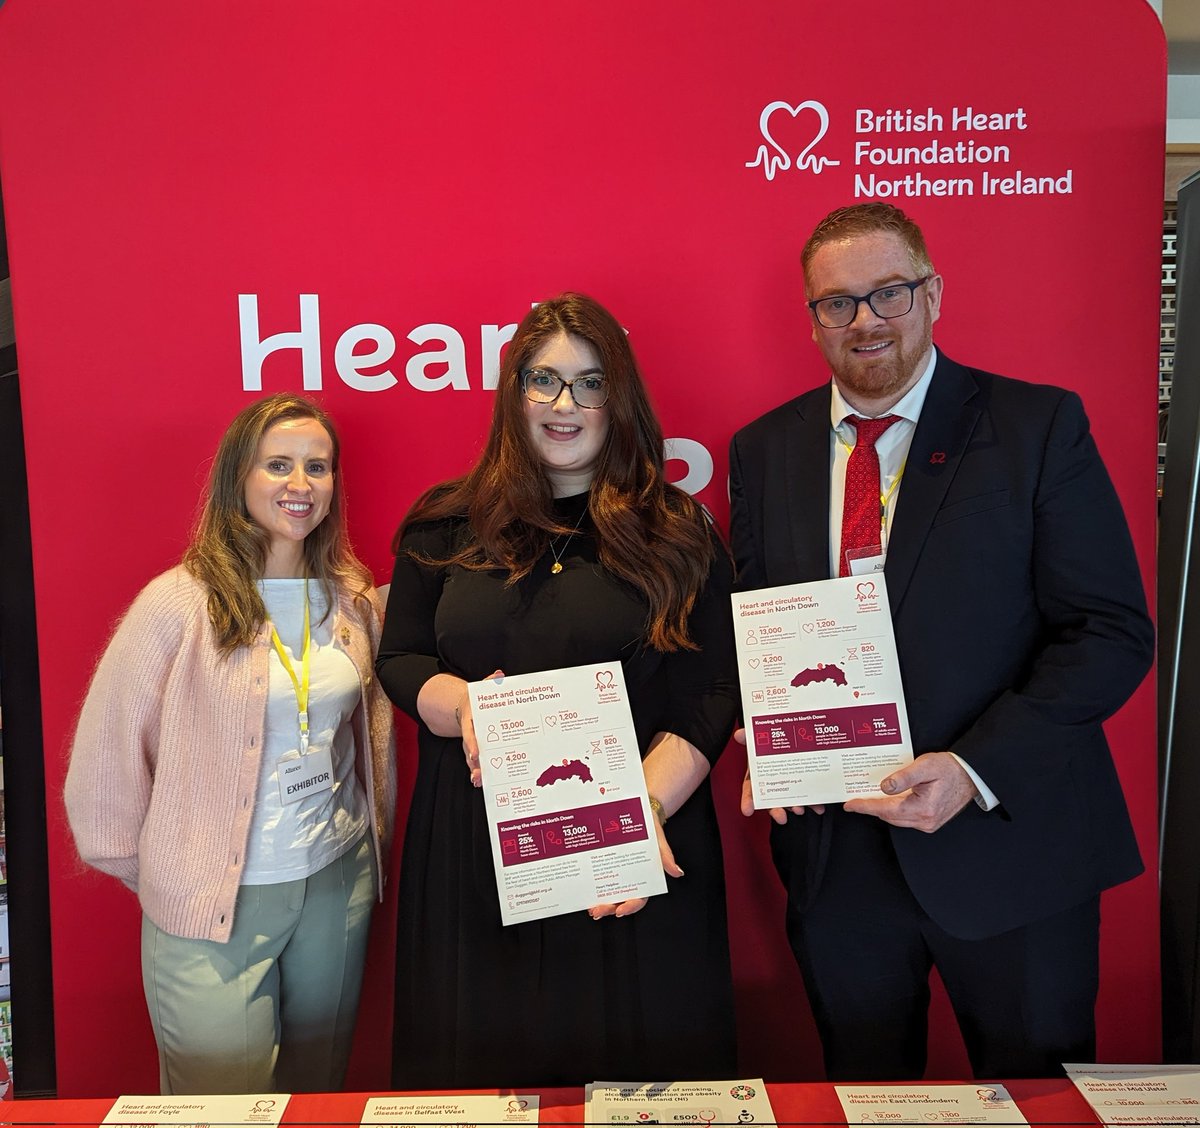 @sianalliance Thanks to @PatrickBrownMLA and @connieegan94 for chatting to us about the Circuit and access to defibrillators #CommunityOfLifeSavers and the heart attack gender gap